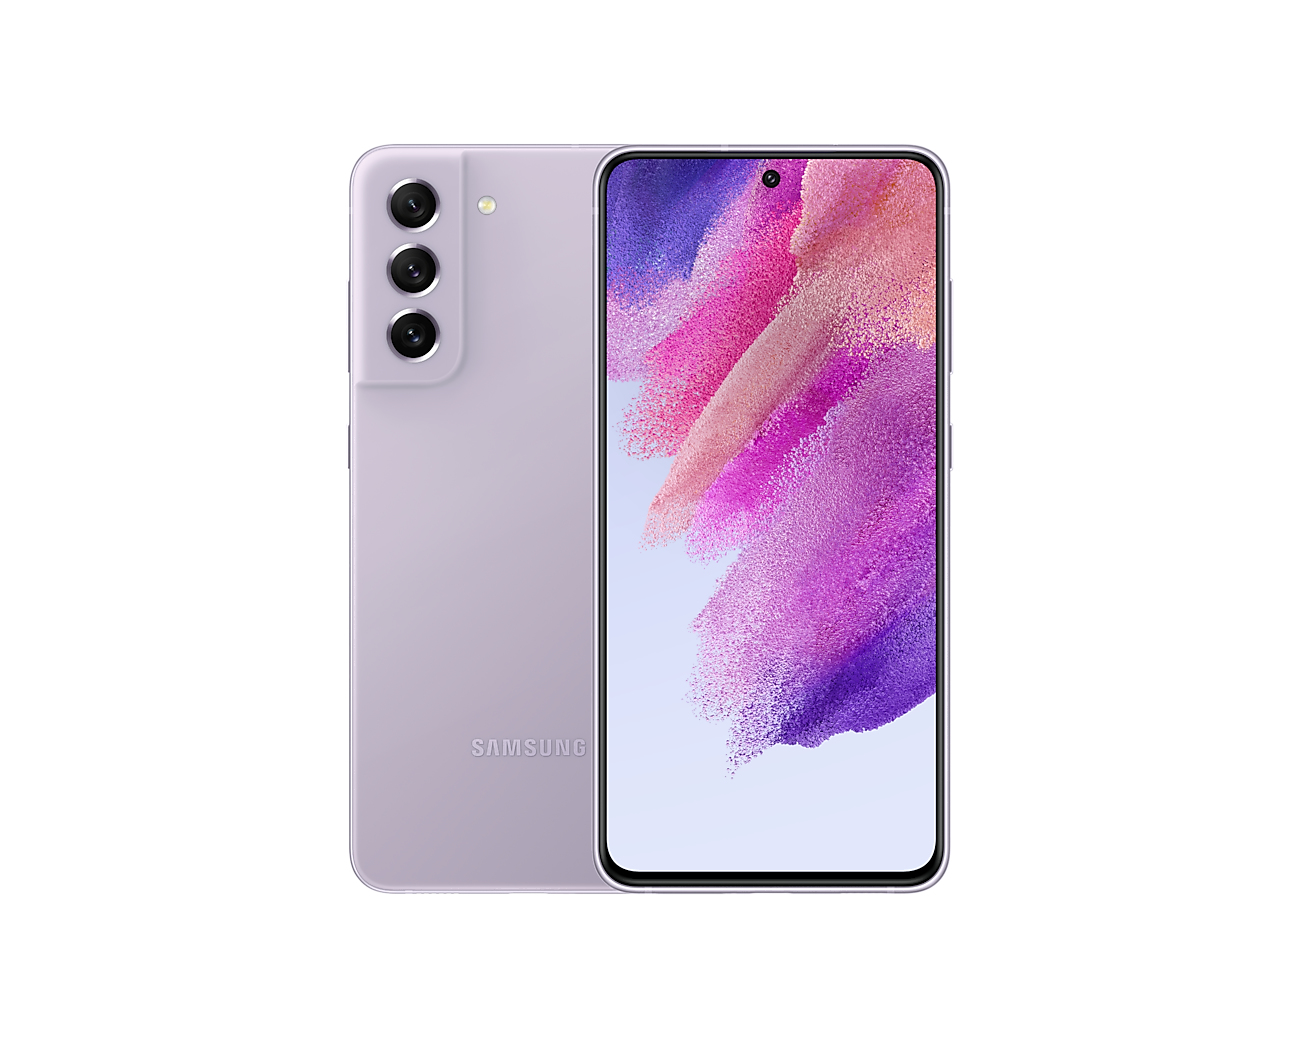 6.4? FHD+ Dynamic AMOLED 2X, Qualcomm SM8350 (One Core 2.84 GHz + Triple Core 2.4 GHz + Quad Core 1.8 GHz), IP68, 802.11 ax, Bluetooth 5.0, USB Type-C, 4500 mAh, Android 11